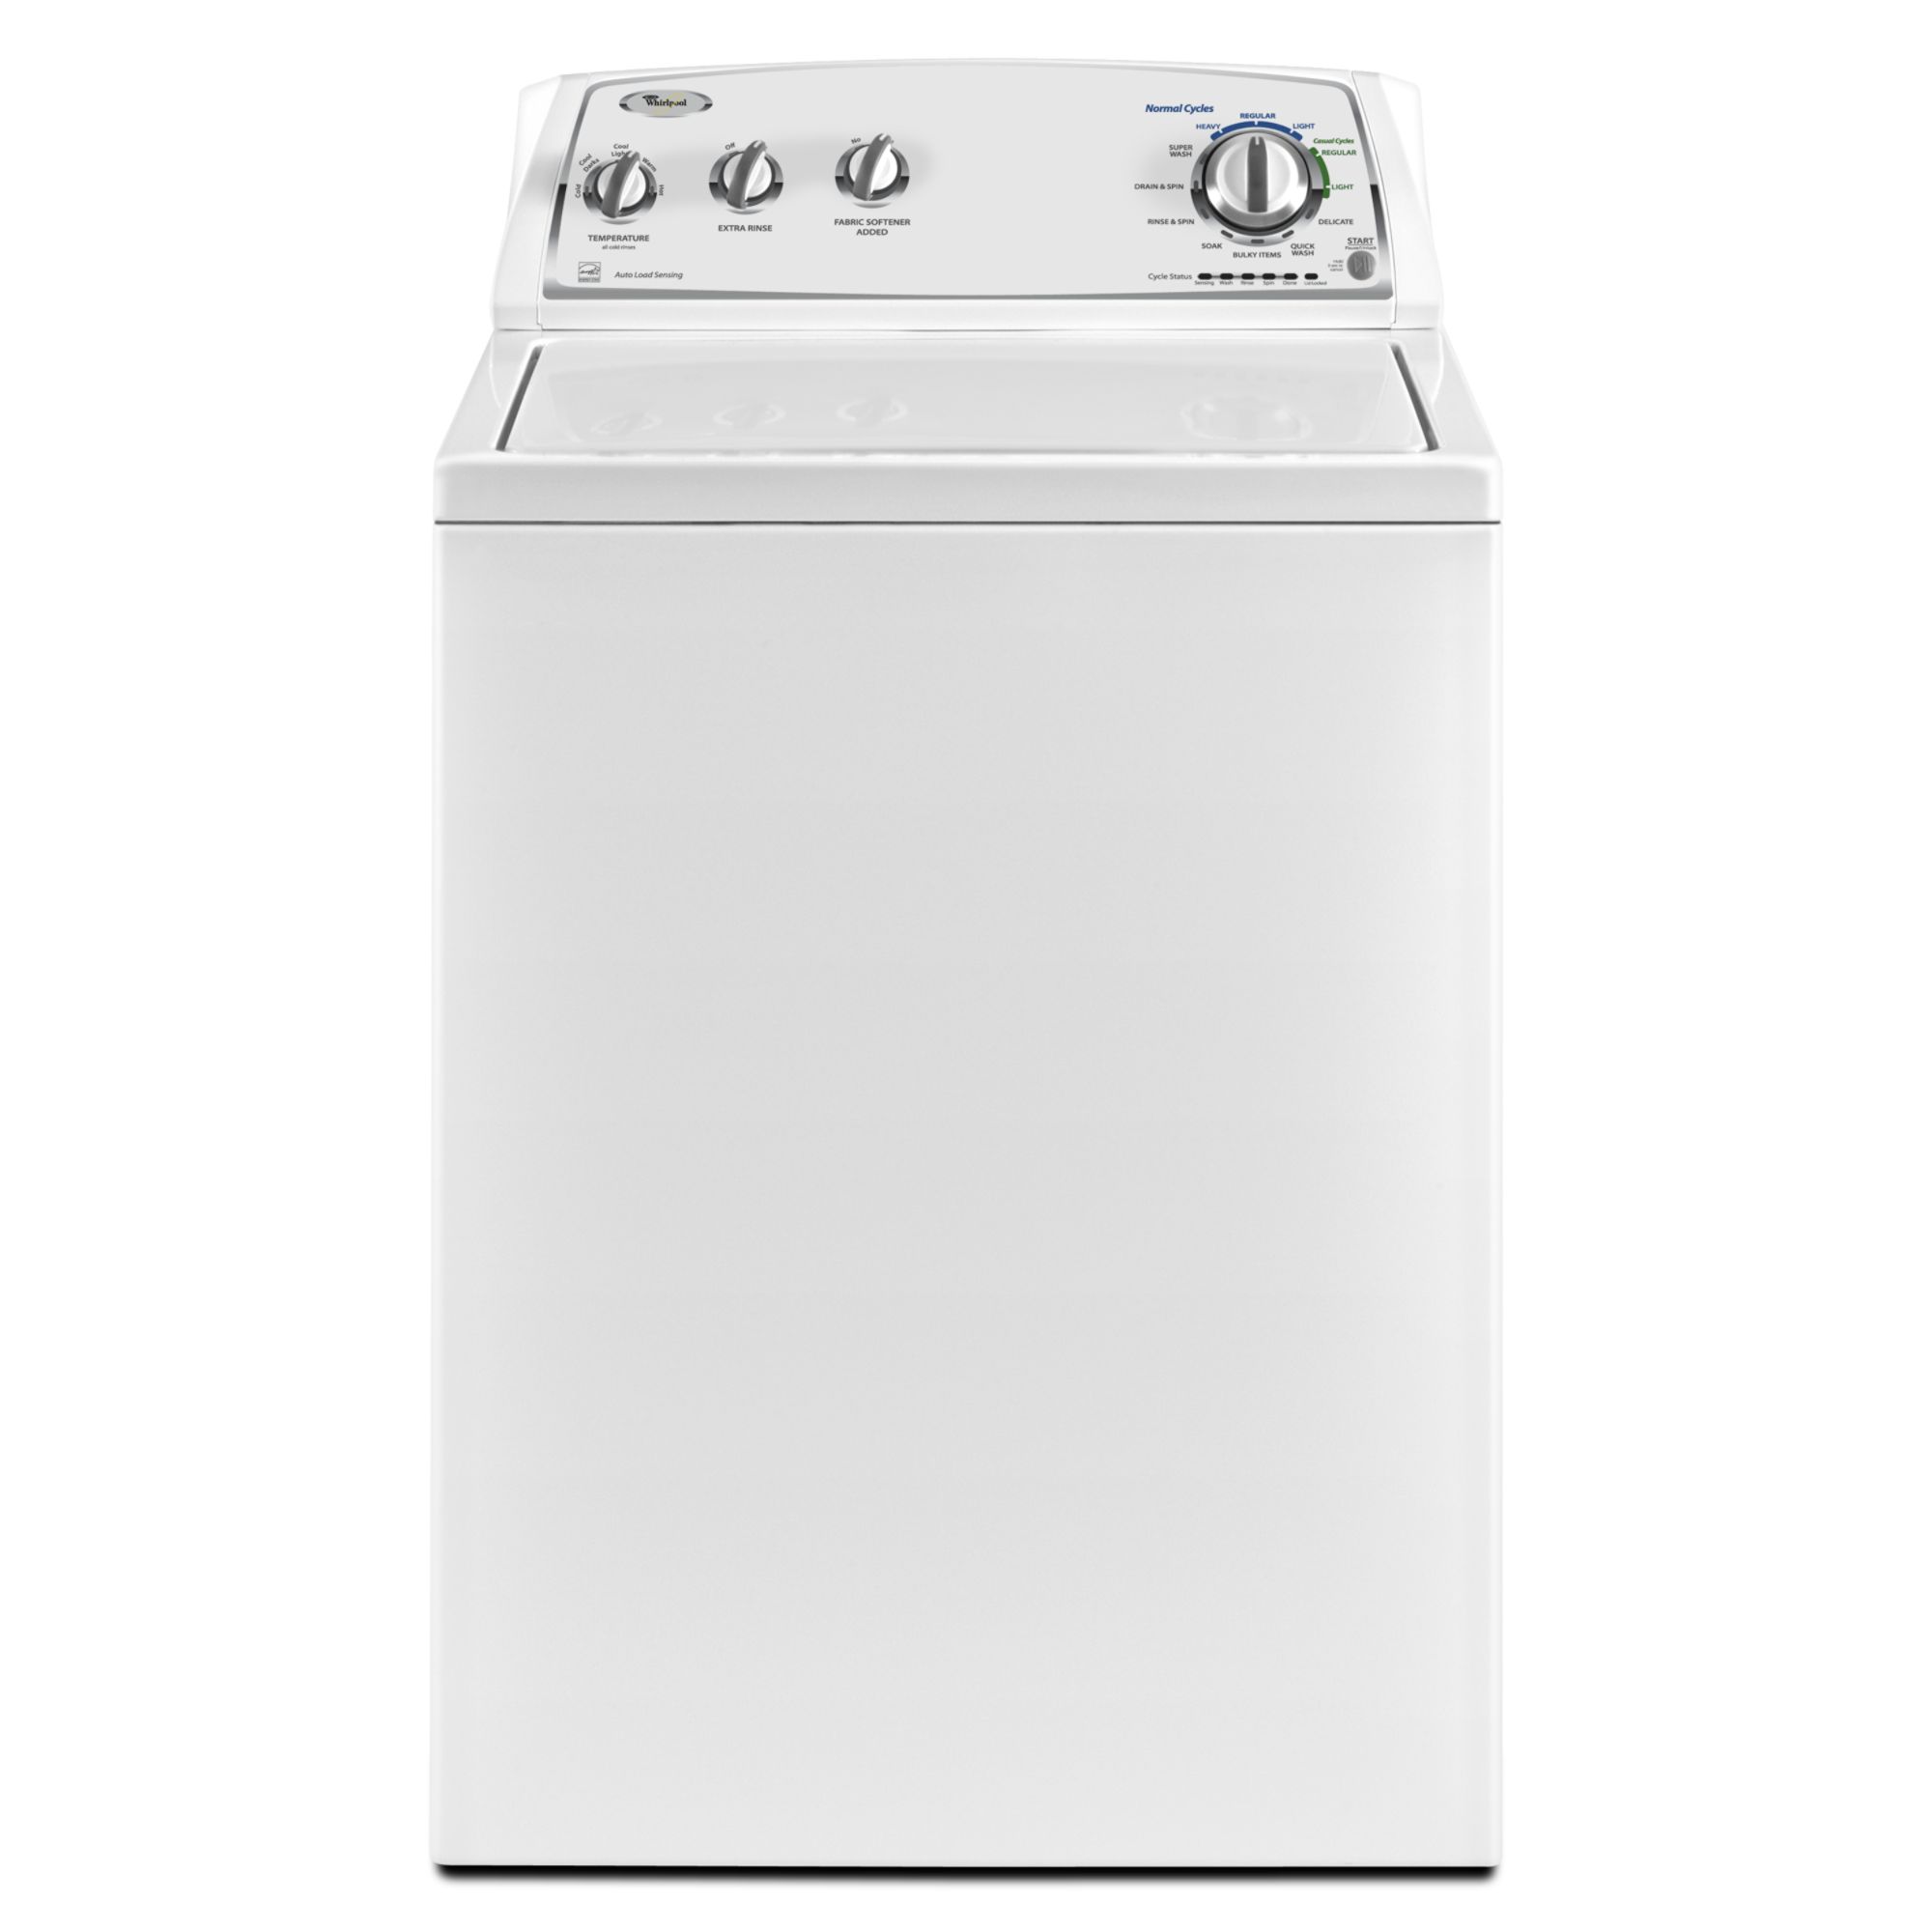 Whirlpool 3.4 cu. ft. Capacity Top-Load Washer - White